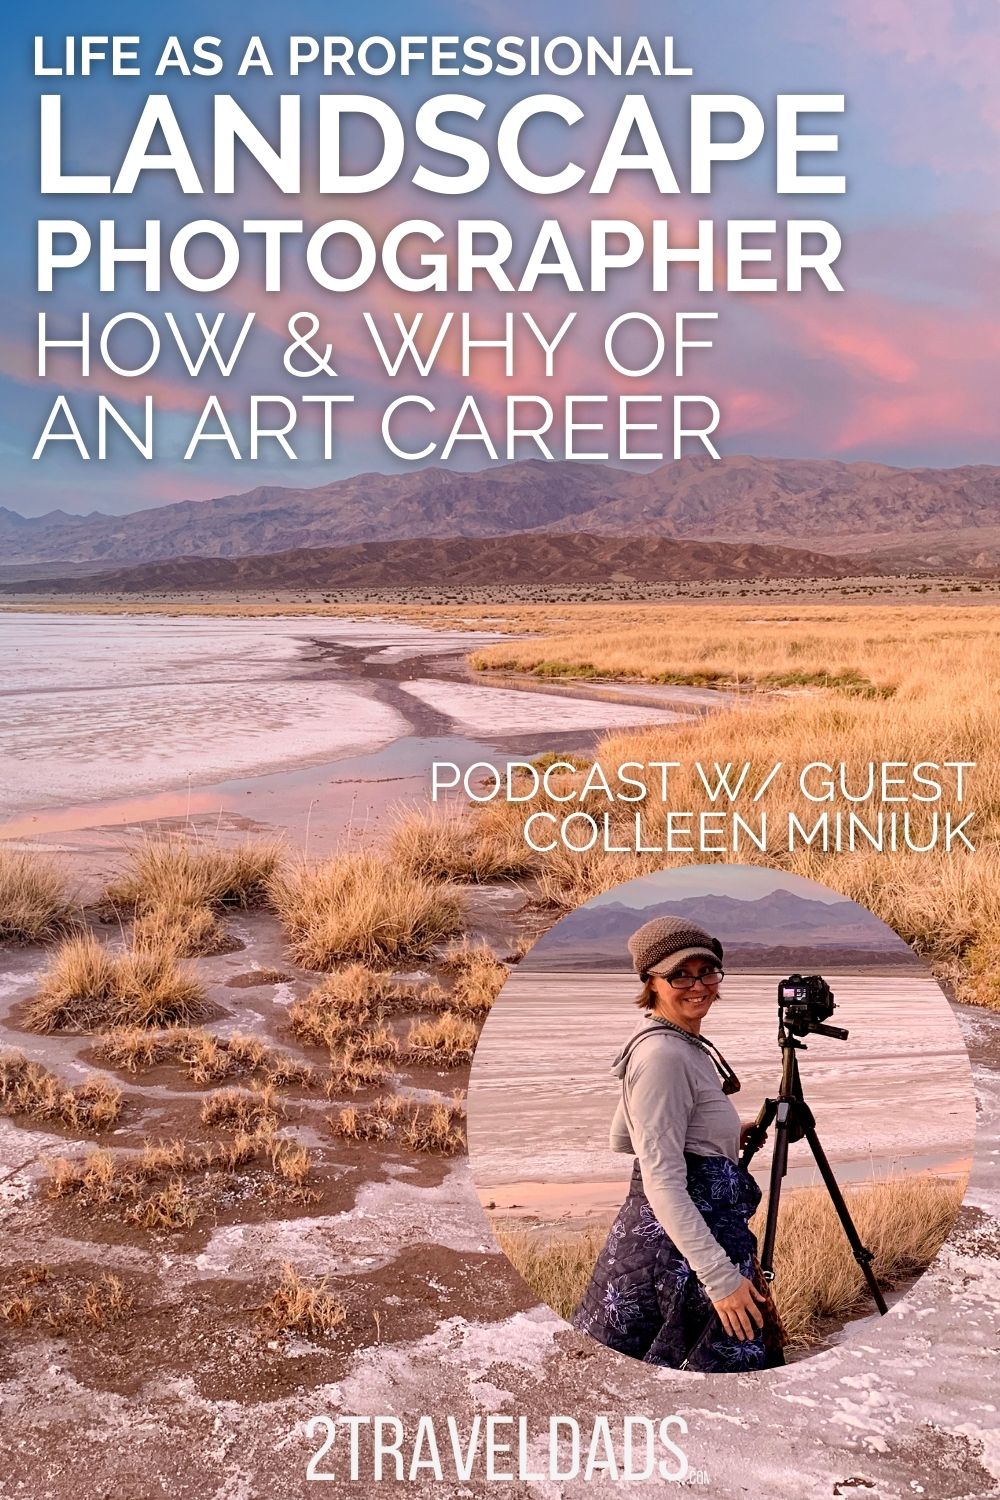 Being a professional landscape photographer is a unique profession, but it's a beautiful combination of technical skills and artistic vision. Colleen Miniuk is a photographer, author and teacher of landscape photography. See how she left her technology career to pursue a joyful existence capturing images of nature from her perspective.